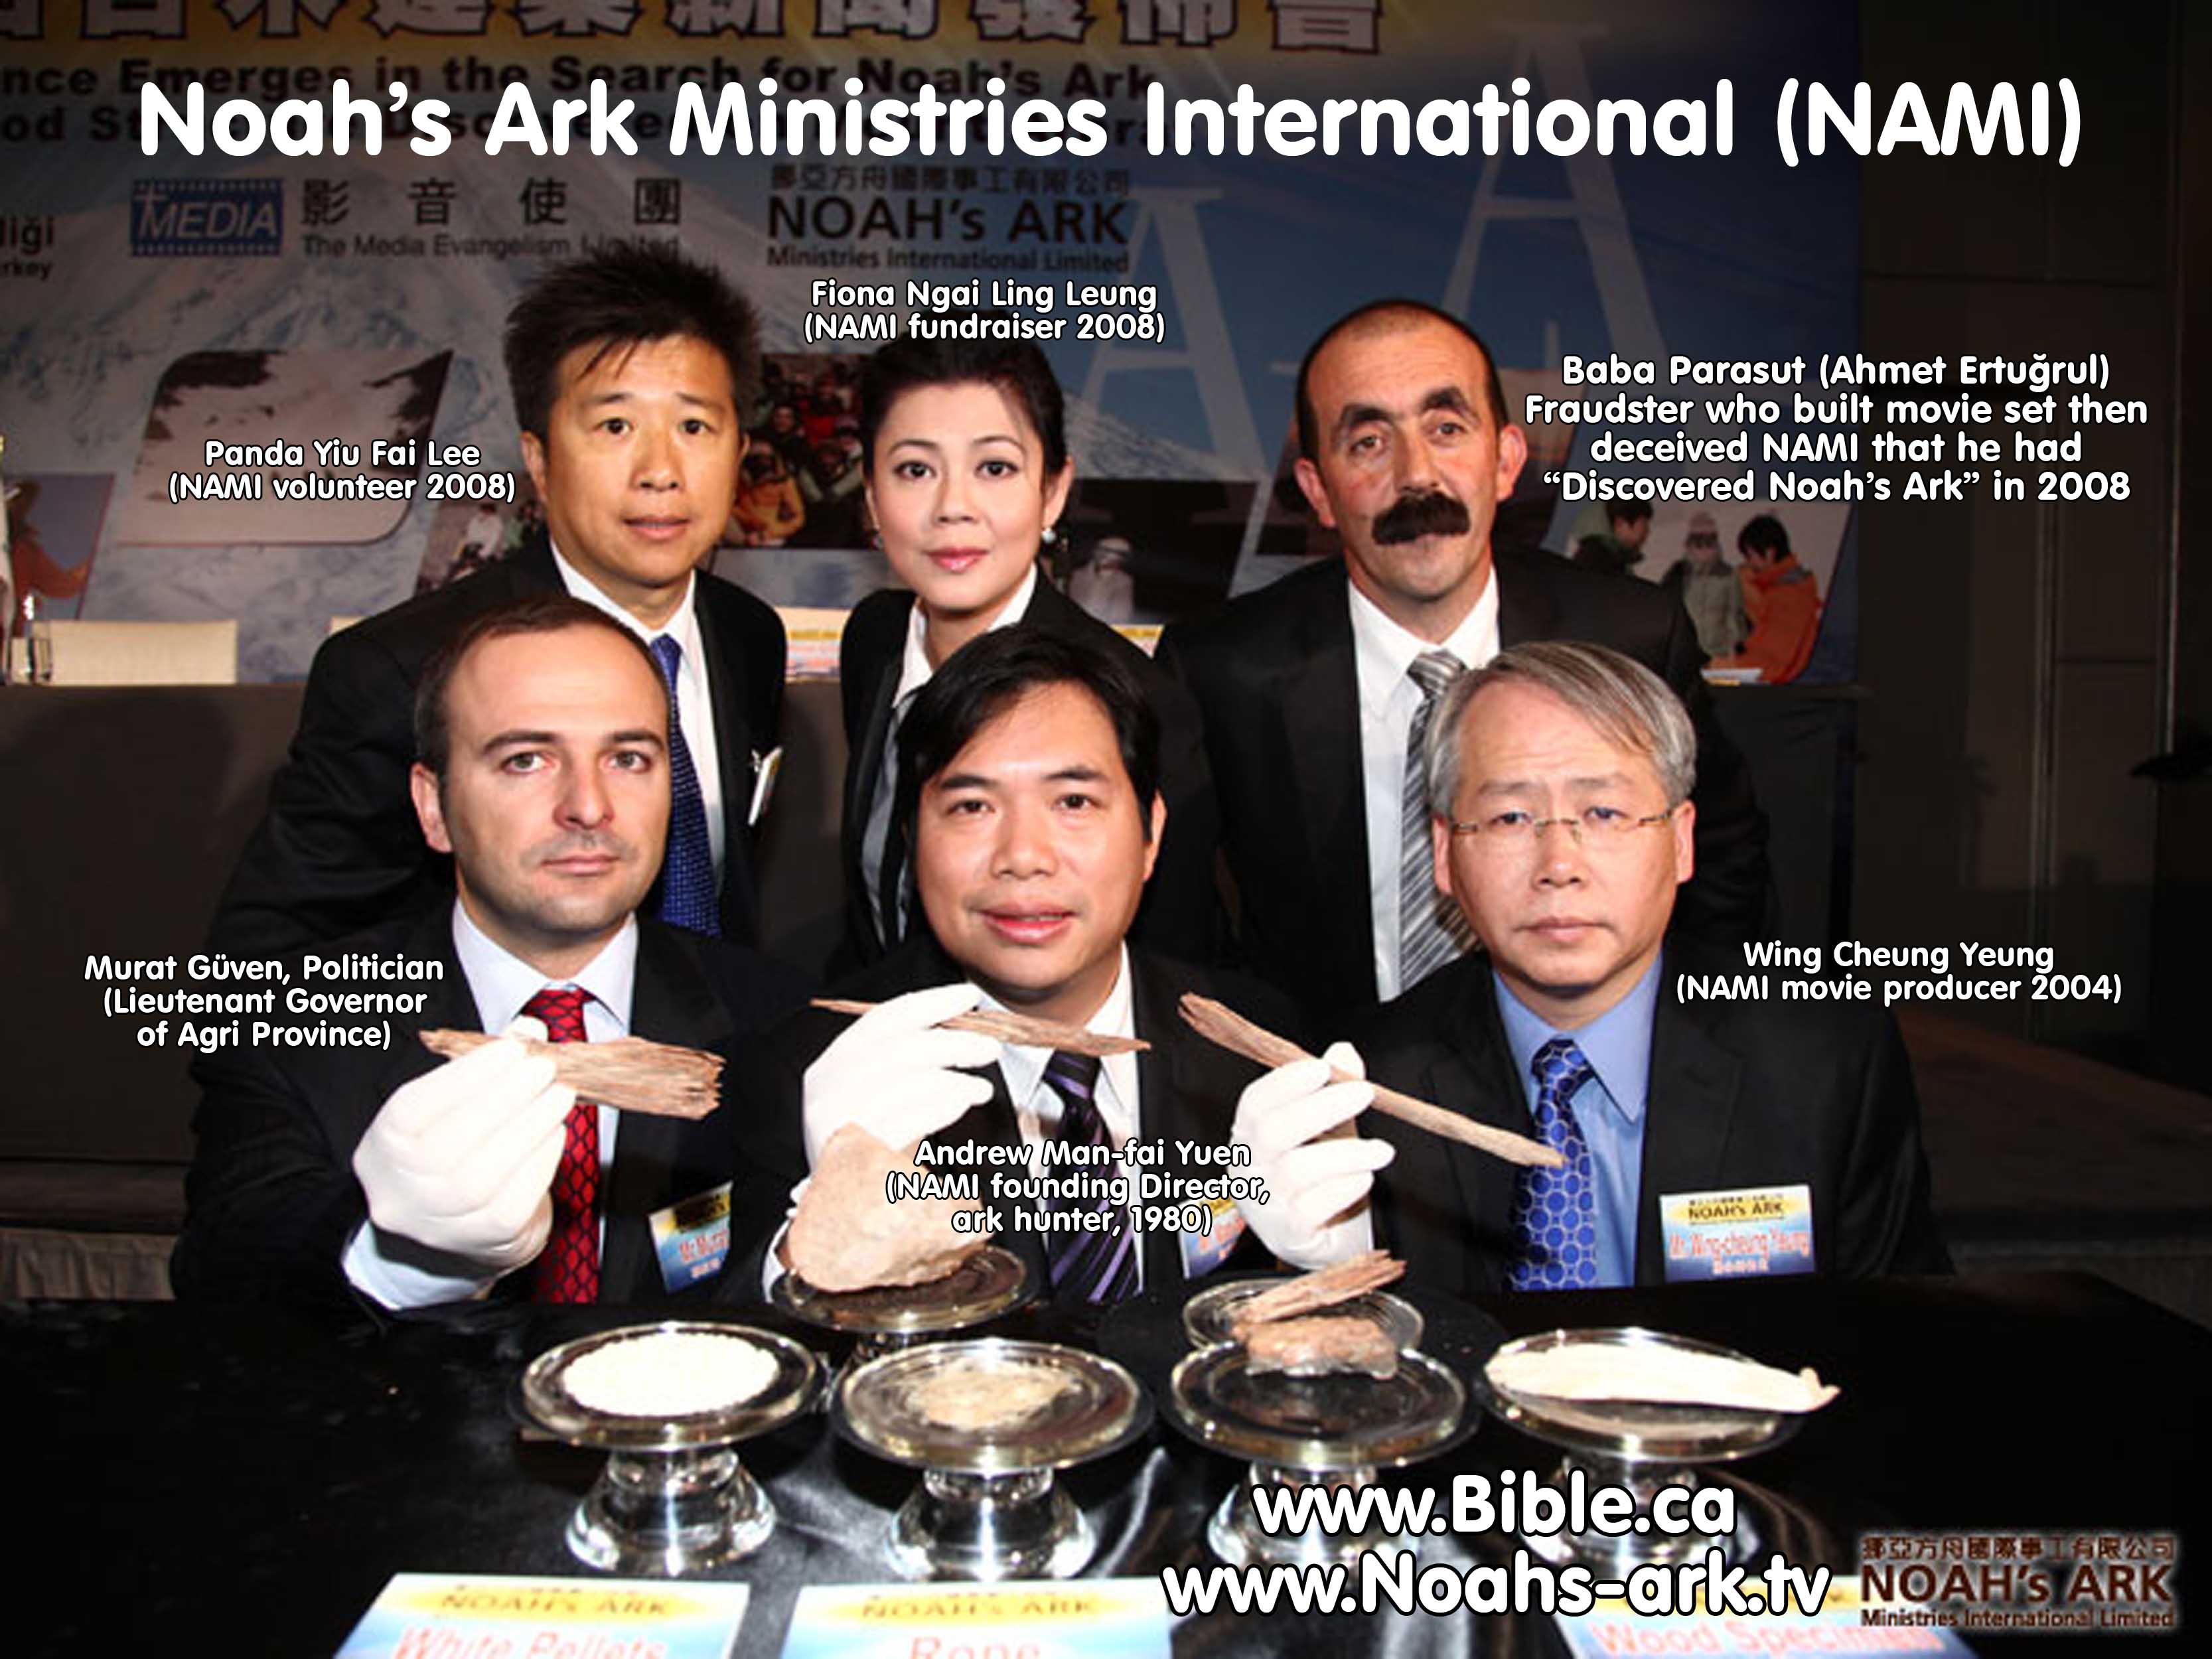 NAMI-noahs-ark-discovered-found-made-in-china-fraud\NAMI-noahs-ark-fraud-baba-parasut-chinese-team.jpg